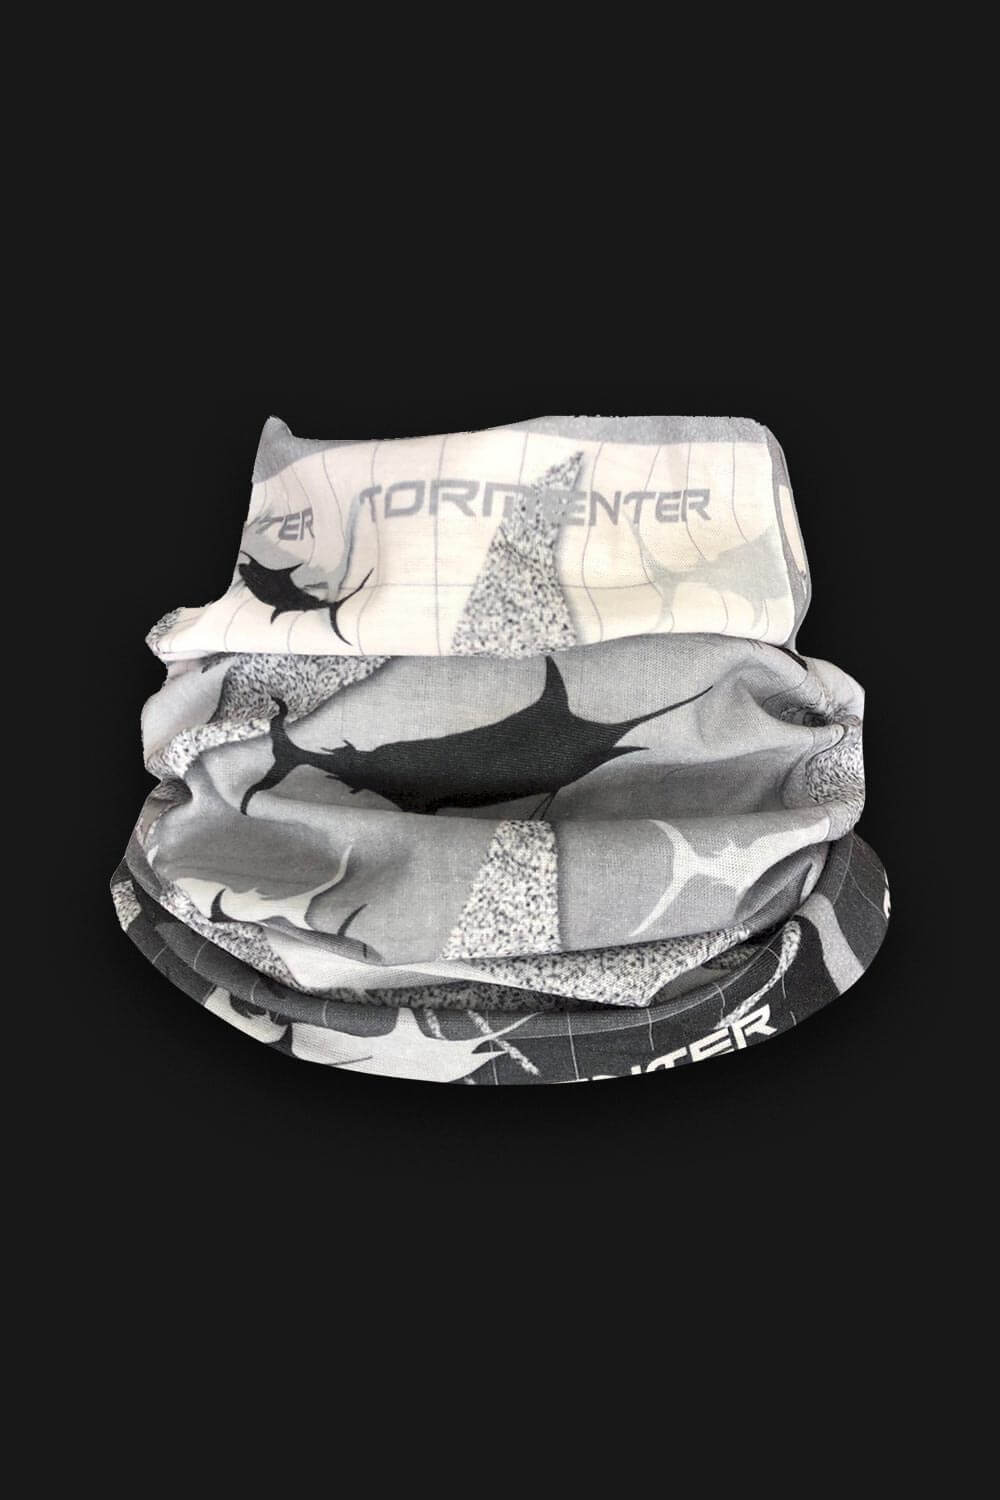 Marlin Grayscale Neck Gaiter - Tormenter Ocean Fishing Gear Apparel Boating SPF Surfing Watersports